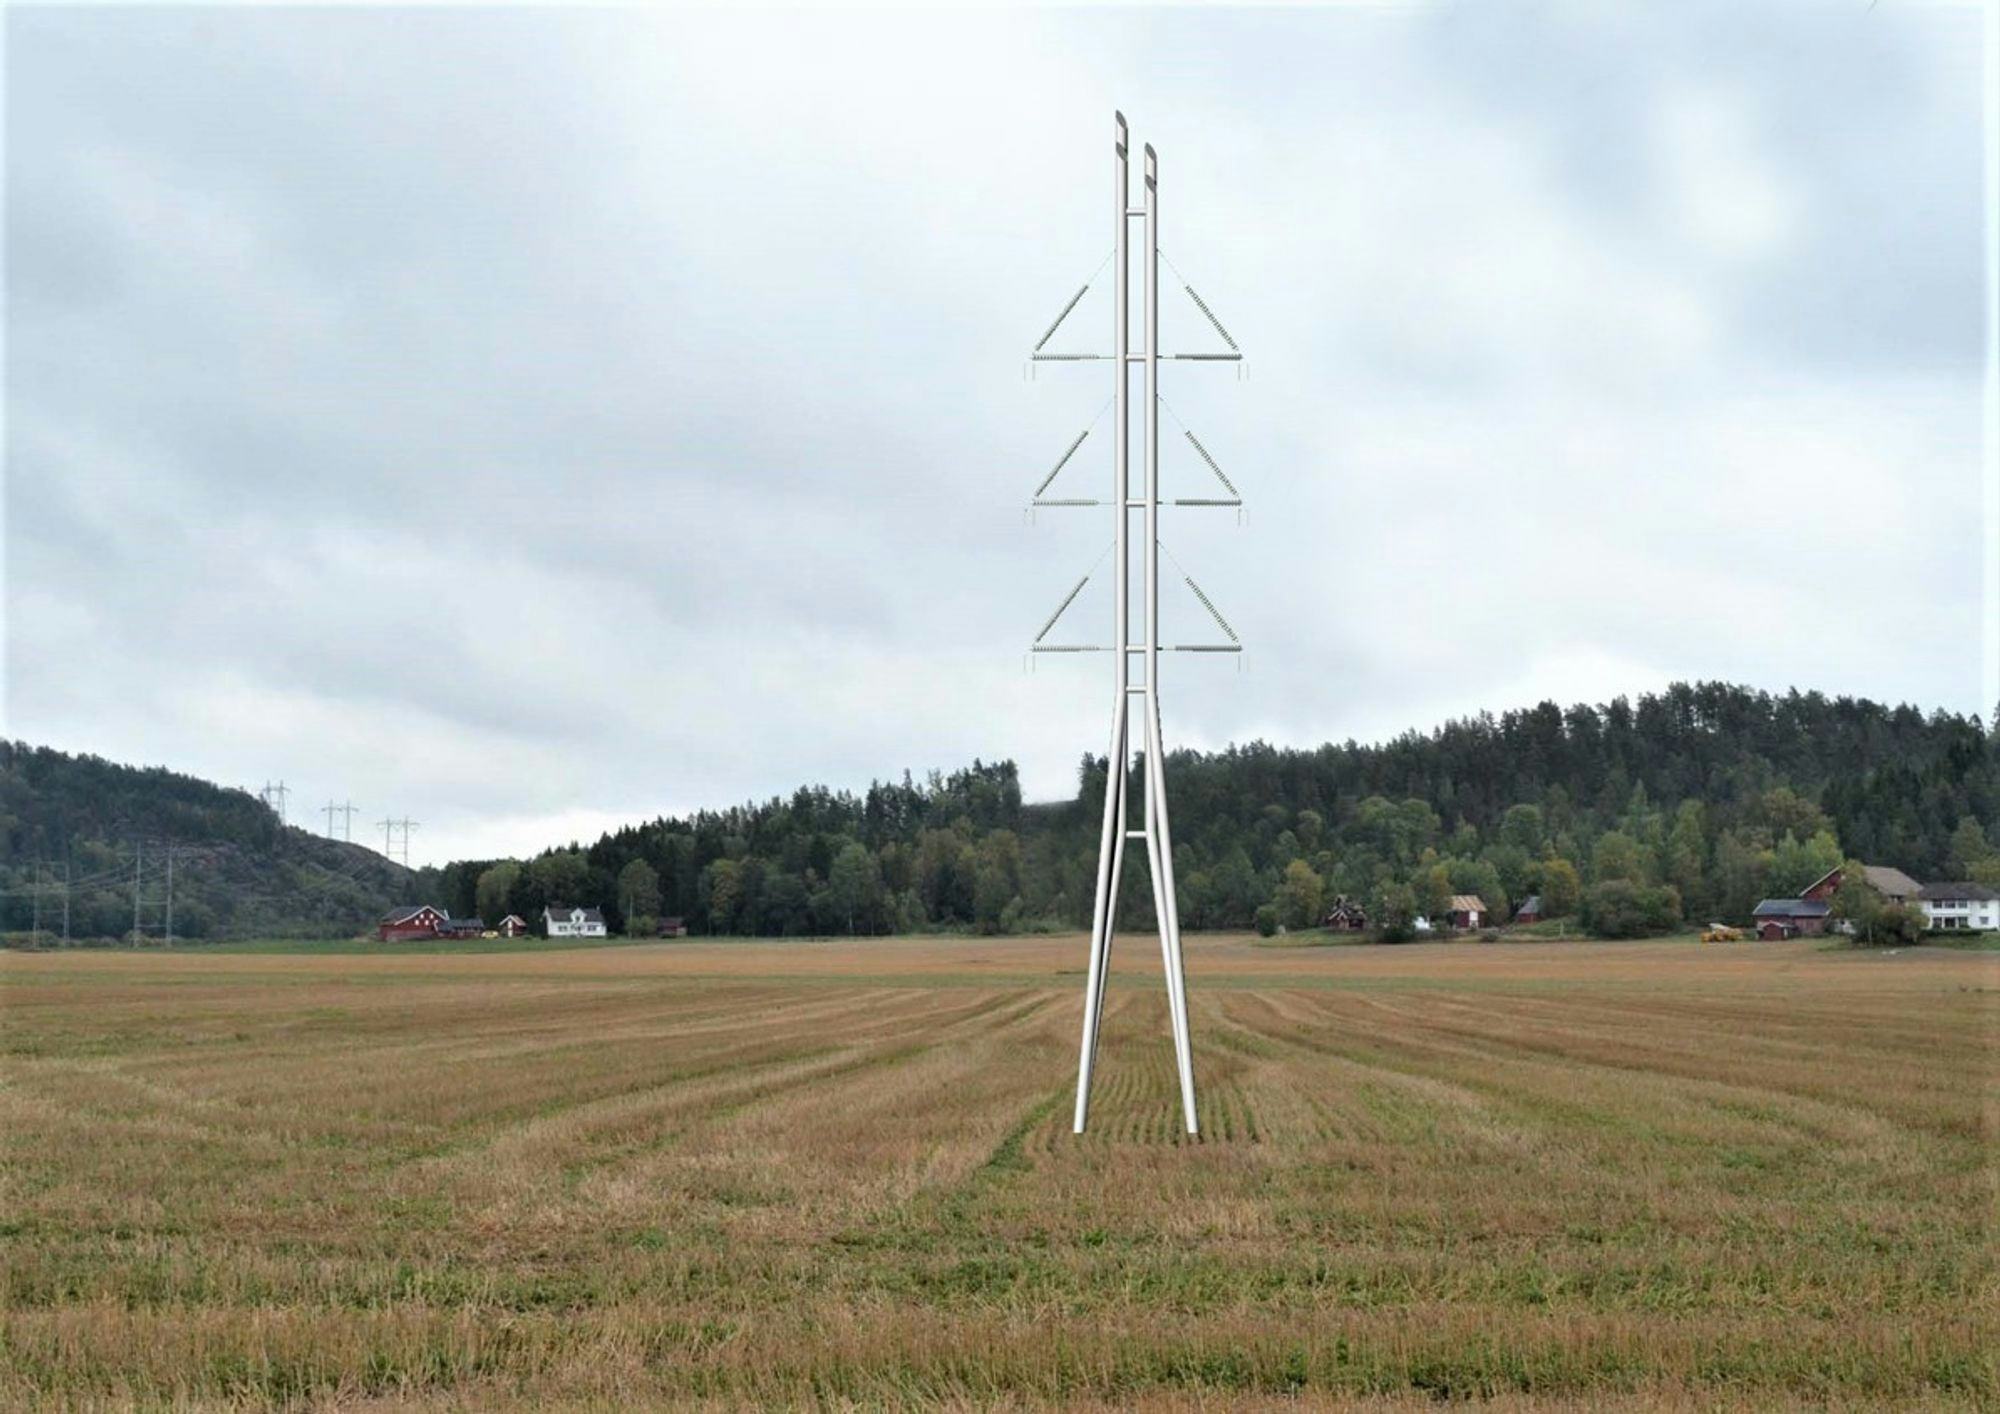 single pole transmission tower in the middle of a field